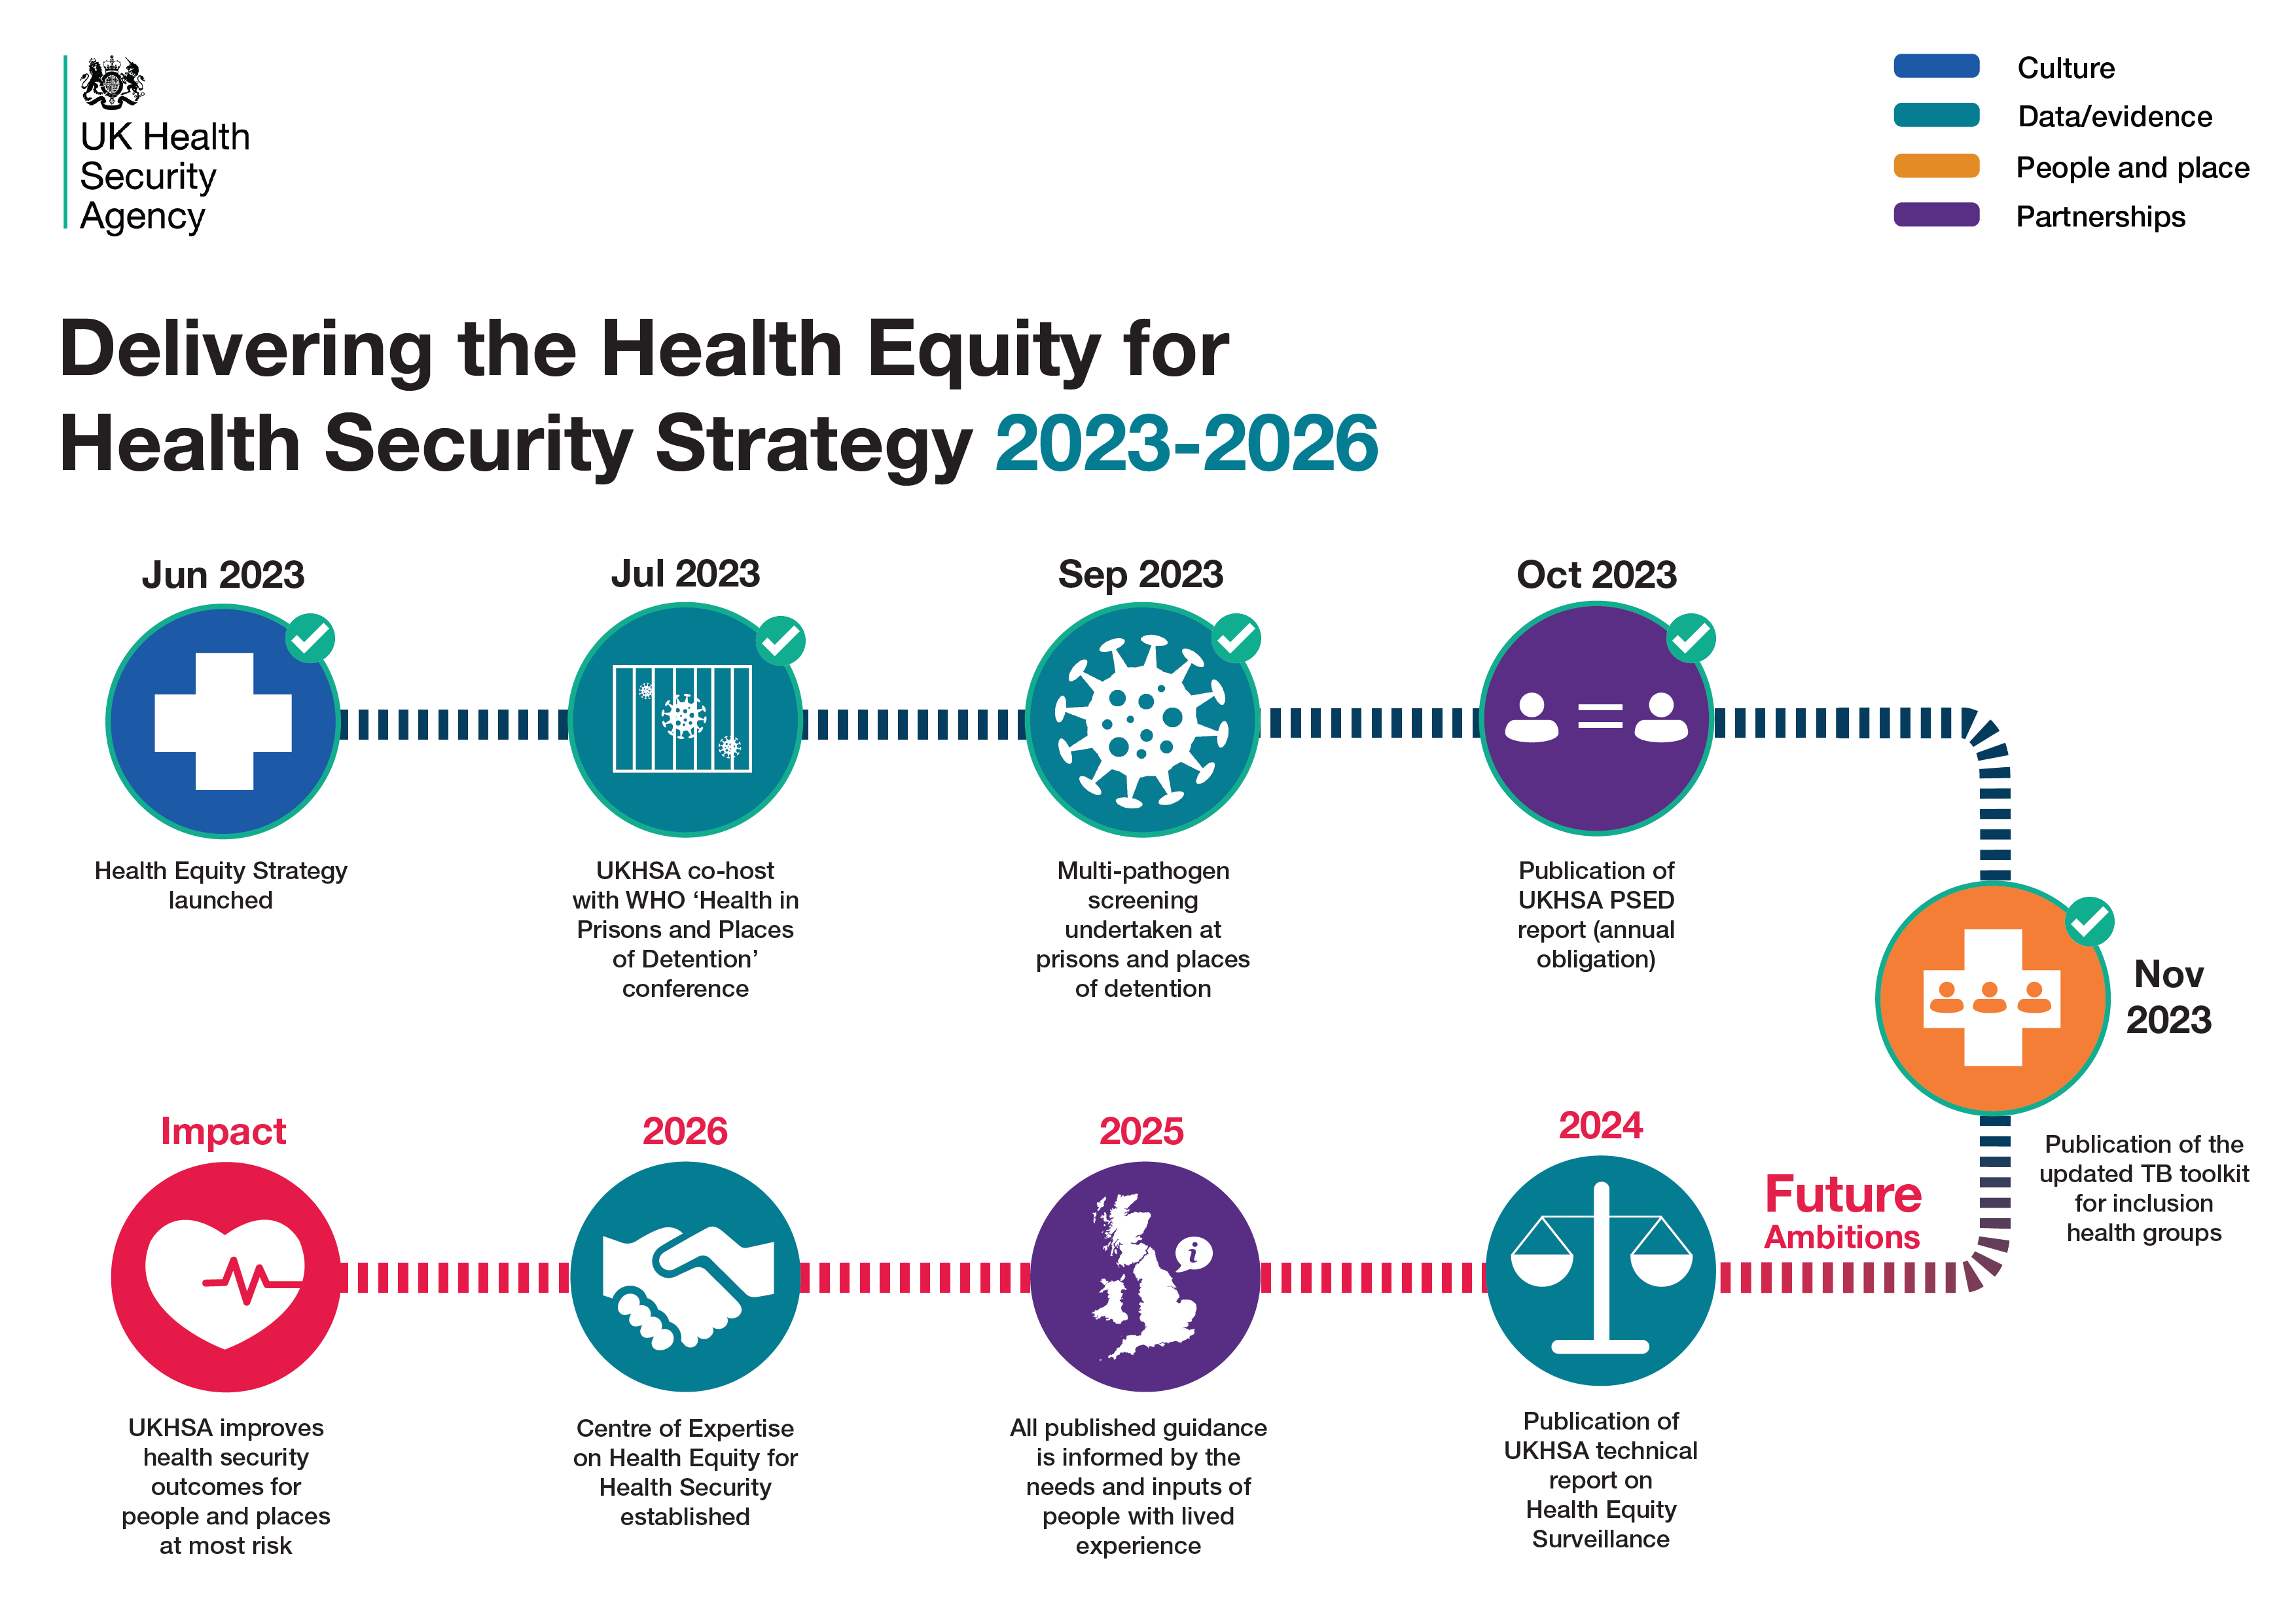 Graphic showing key milestones in delivering the UKHSA Health Equity for Health Security Strategy